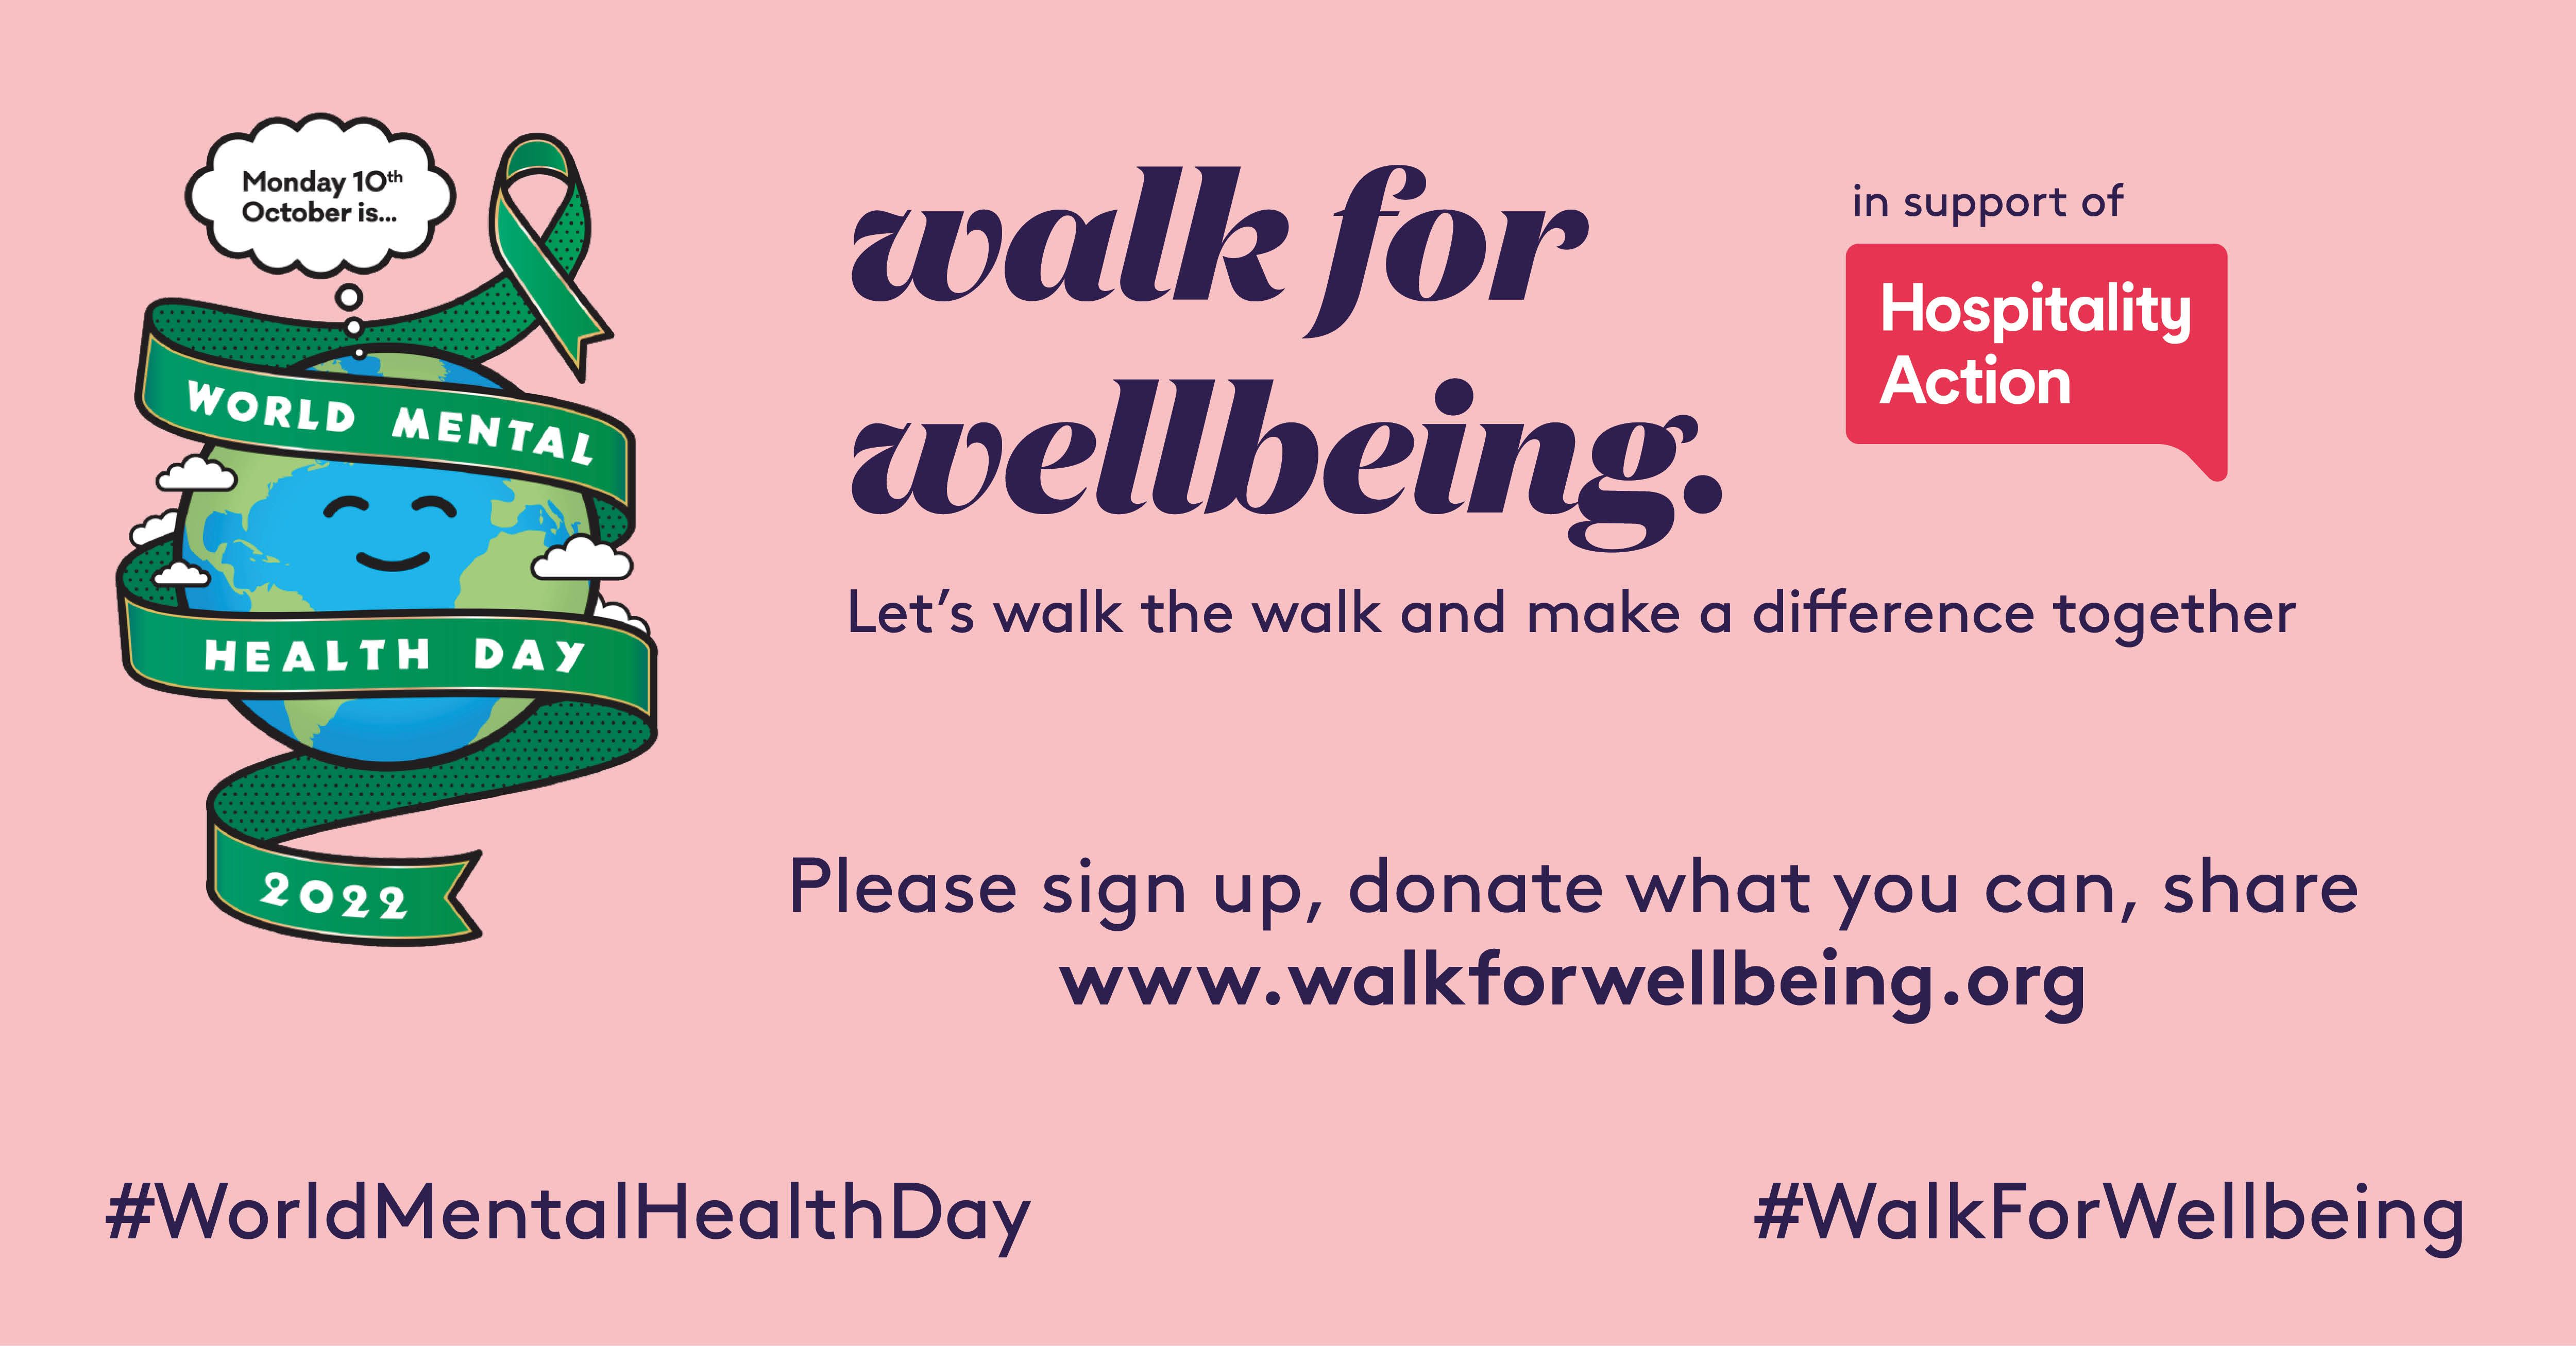 Walk for Wellbeing Hospitality comes together to support mental health